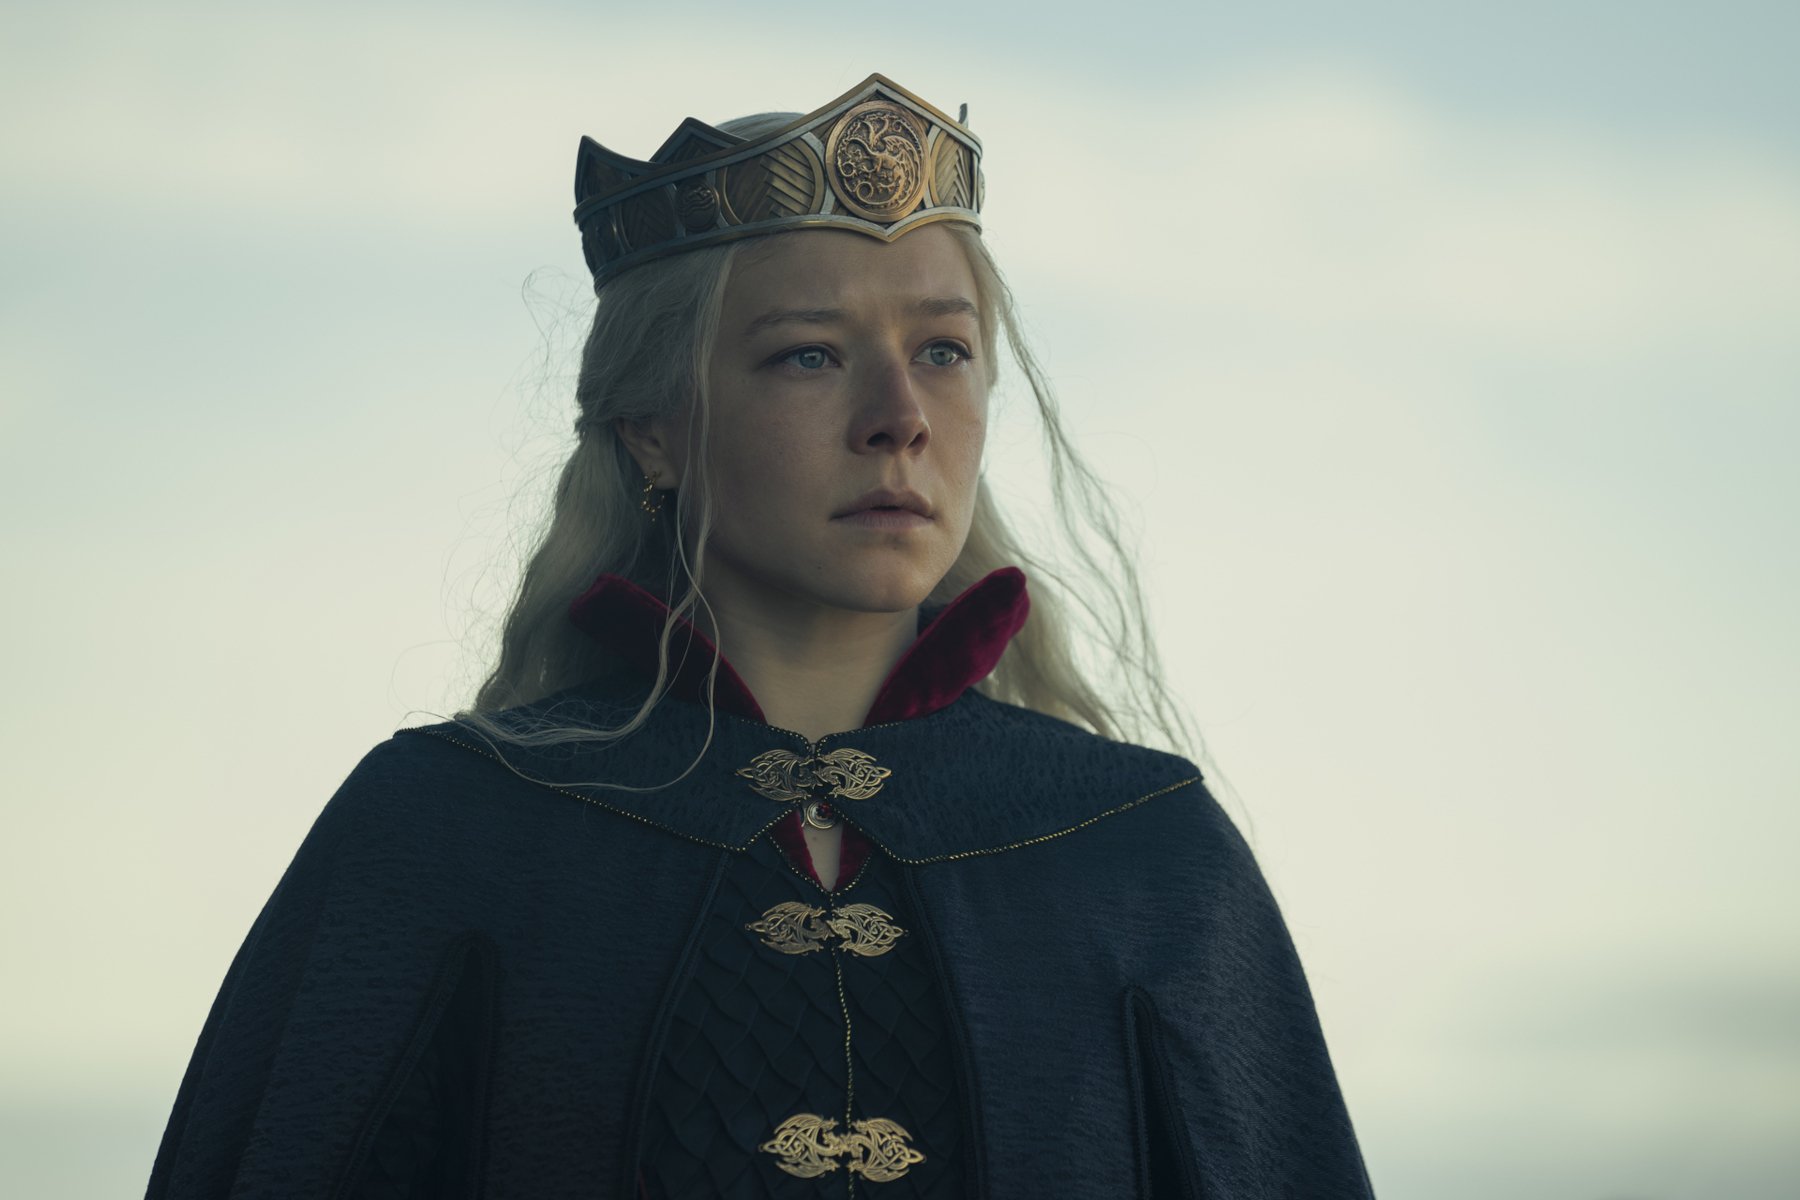 Emma D'Arcy as Rhaenyra Targaryen in 'House of the Dragon' for our article about season 2. She's wearing a crown and looks conflicted.